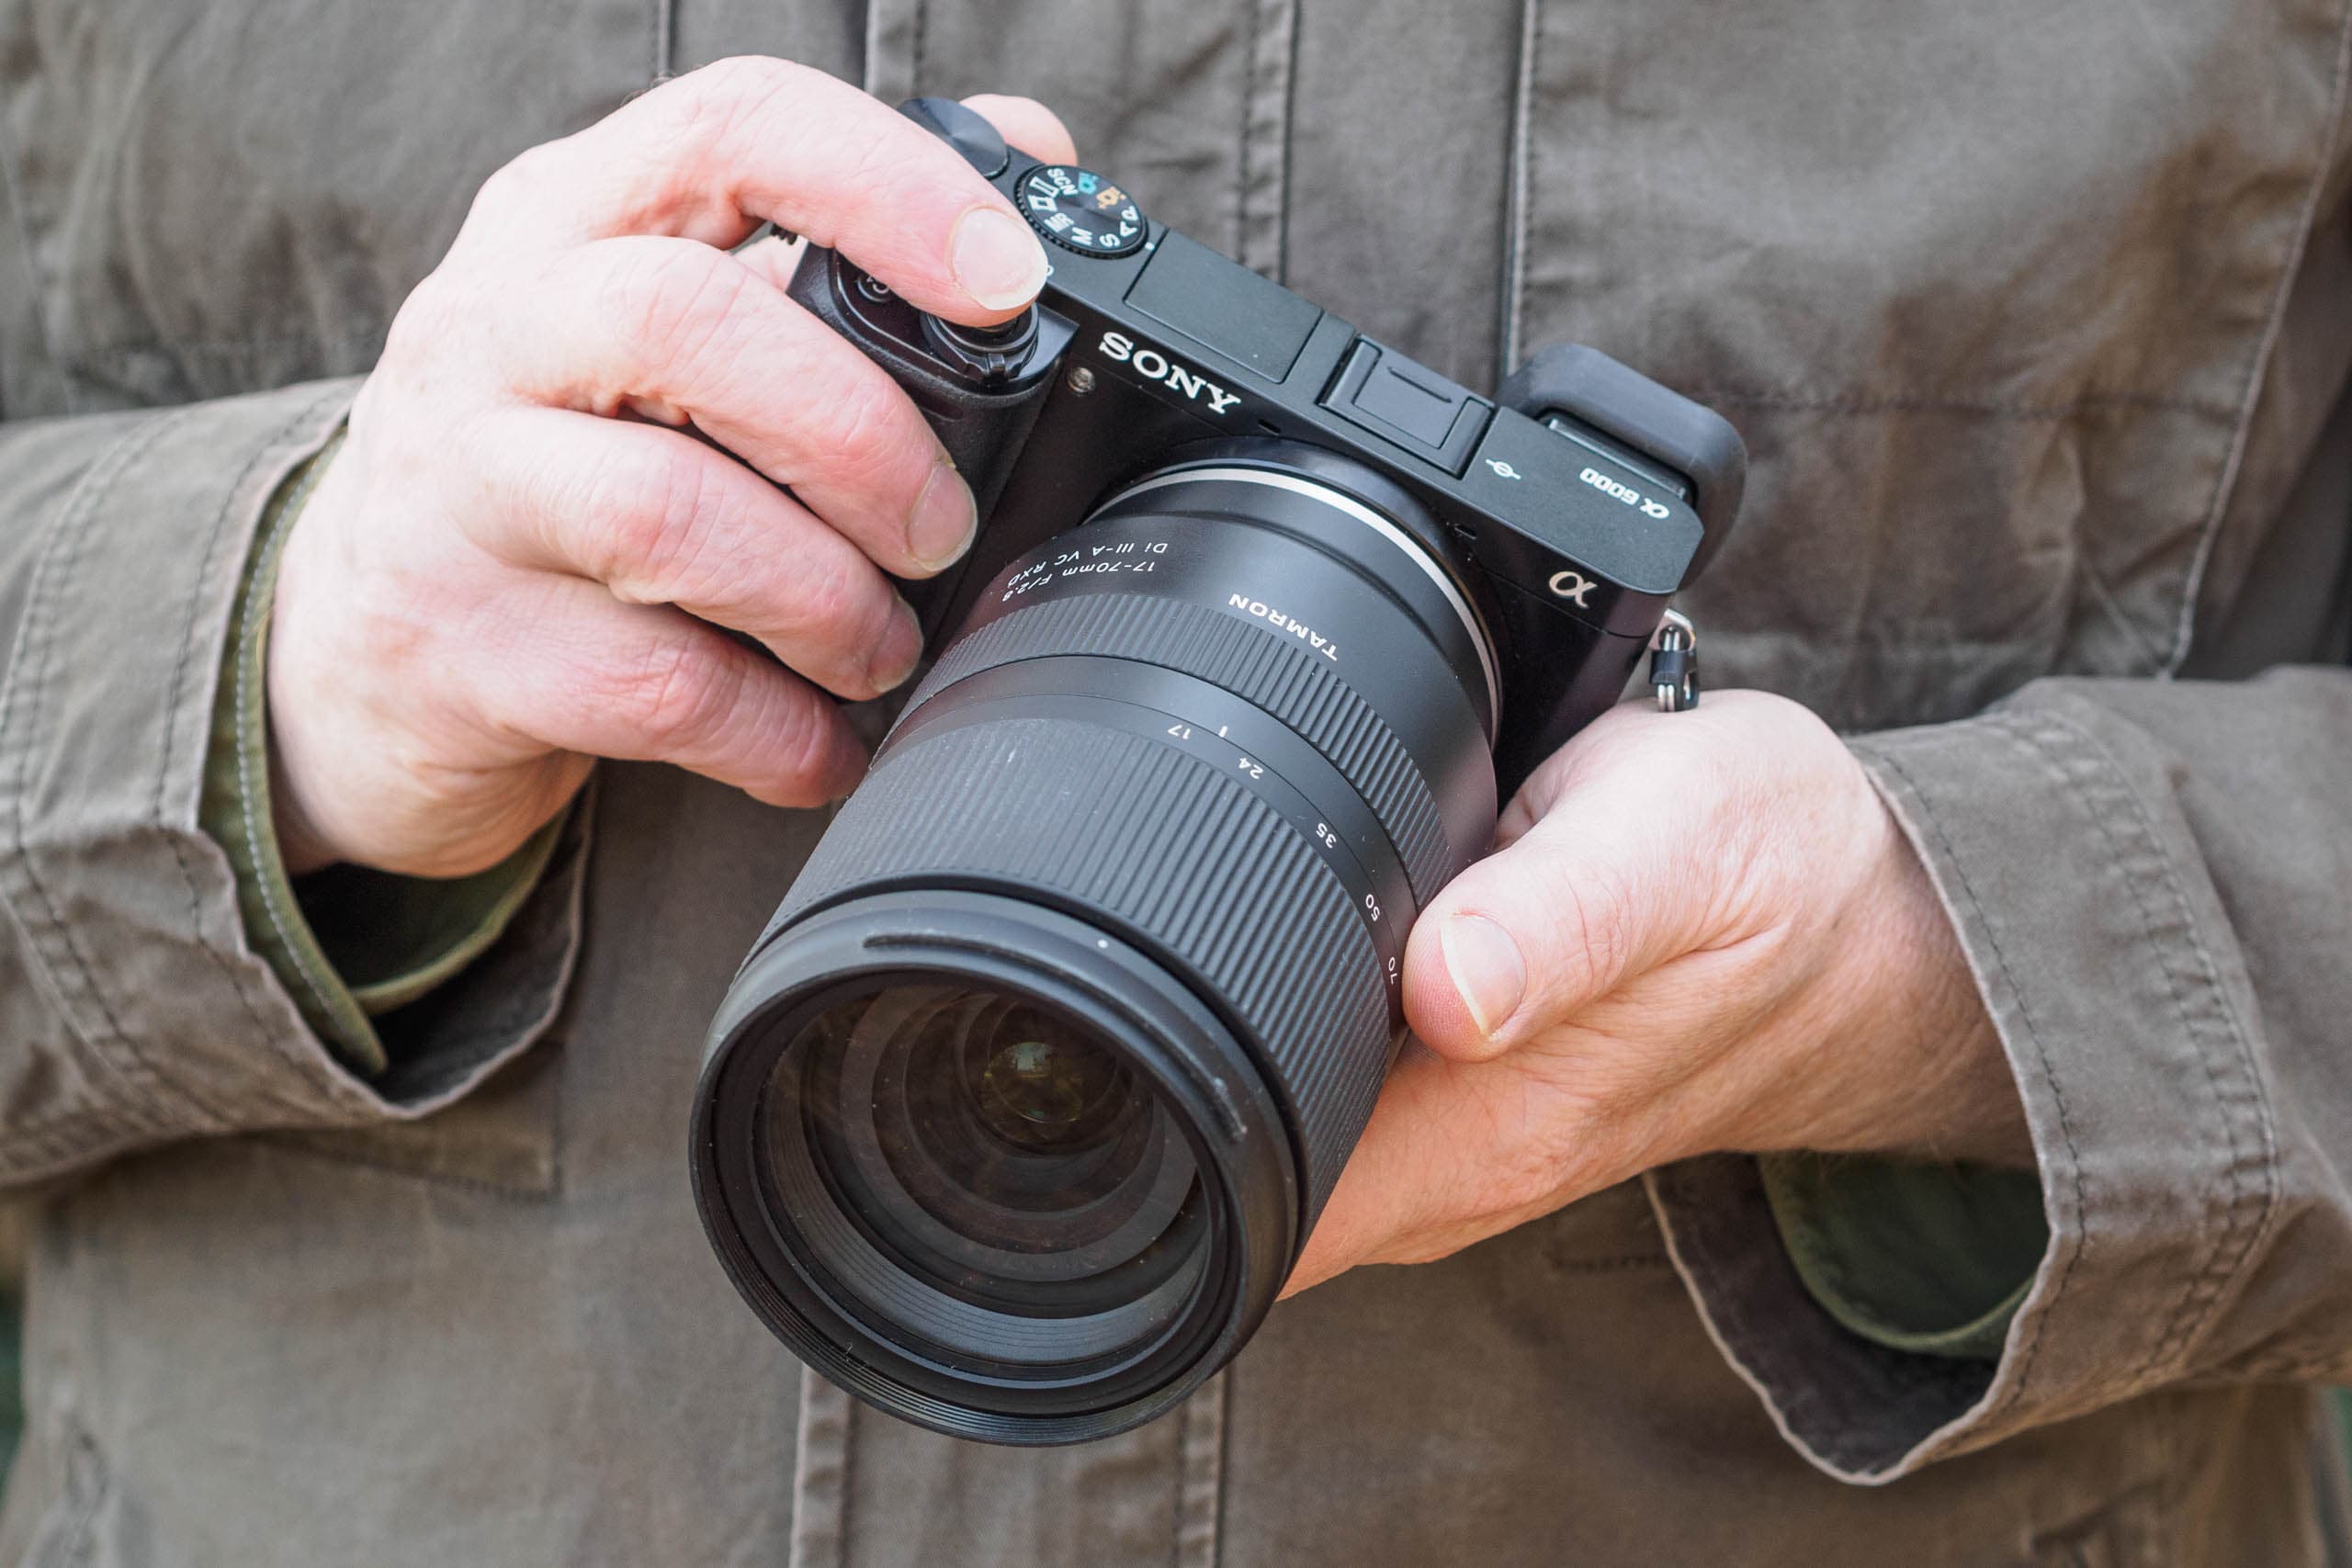 Tamron 17-70mm F/2.8 Di III-A VC RXD review - Amateur Photographer